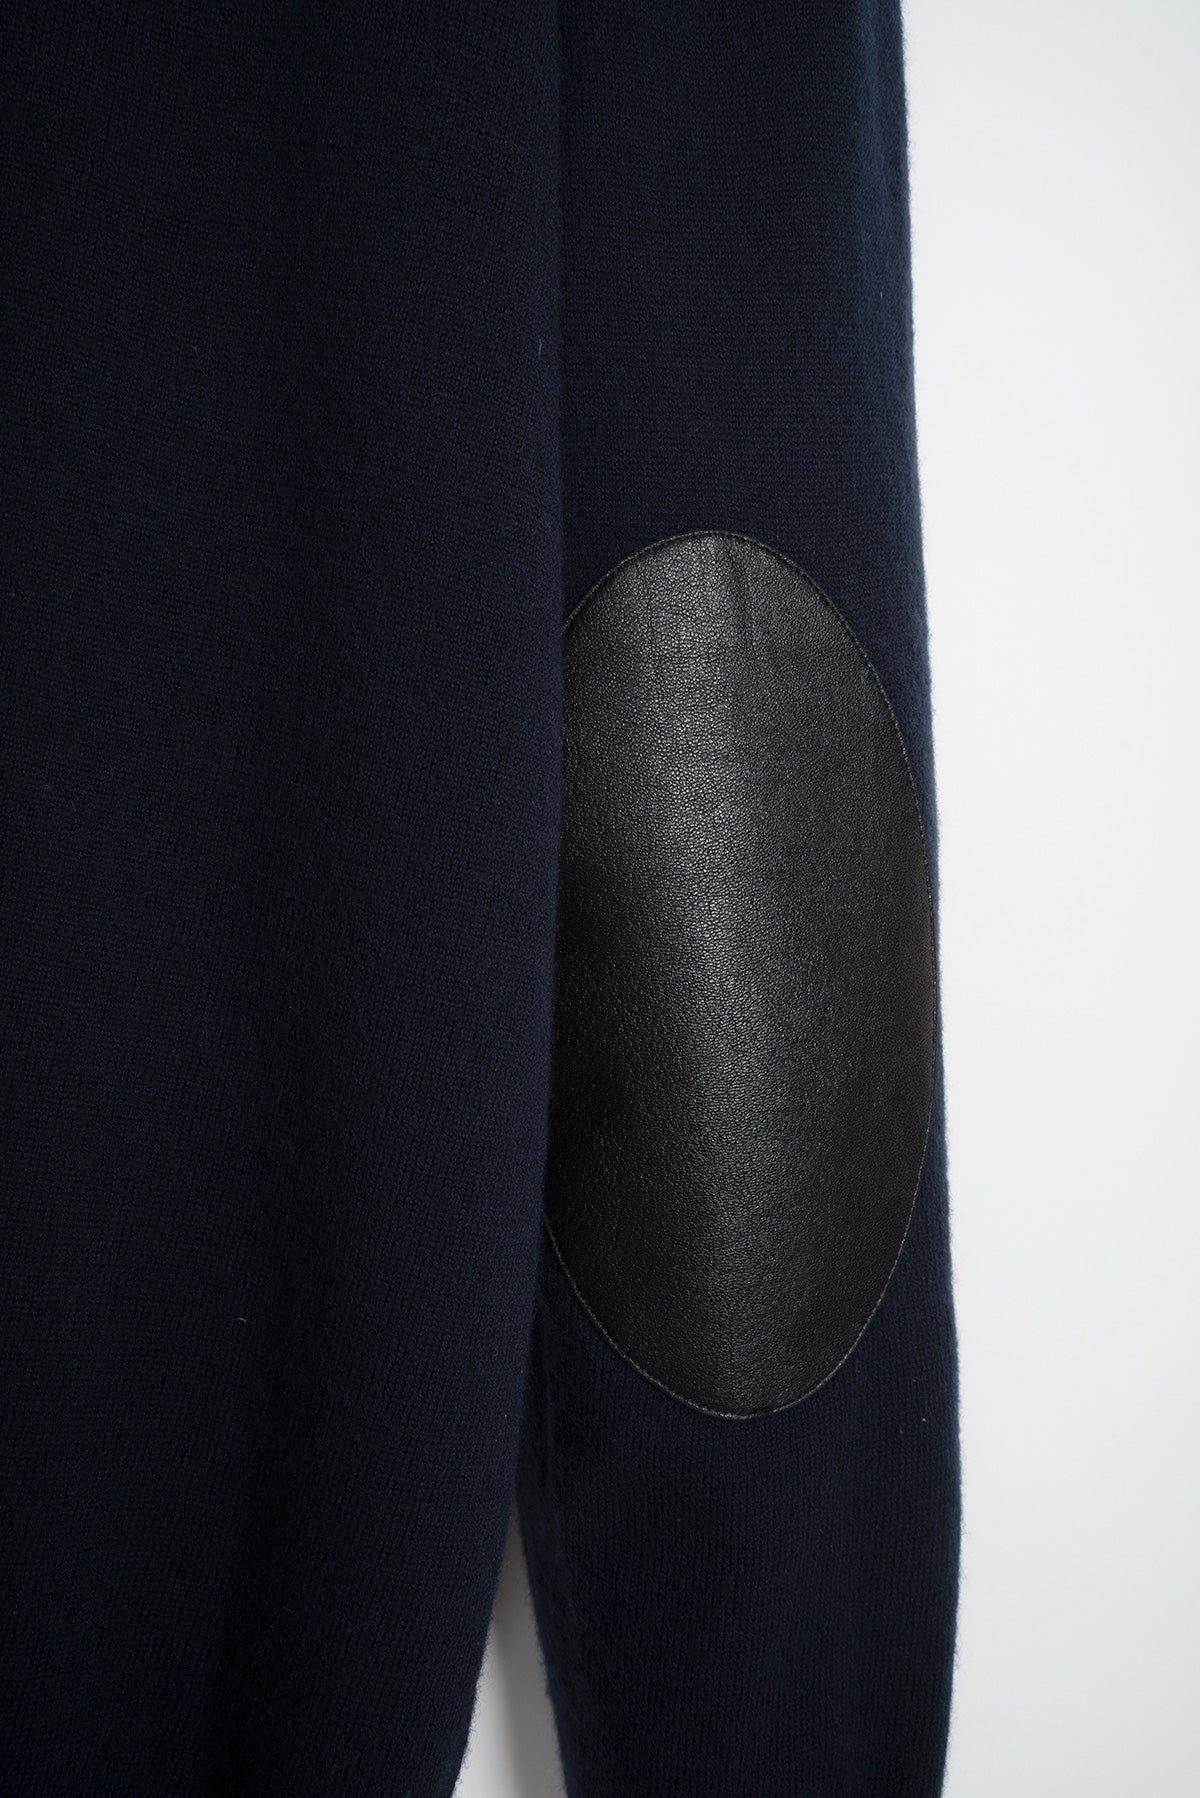 2009 A/W DARK BLUE WOOL CARDIGAN WITH LAMB LEATHER ELBOW PATCHES